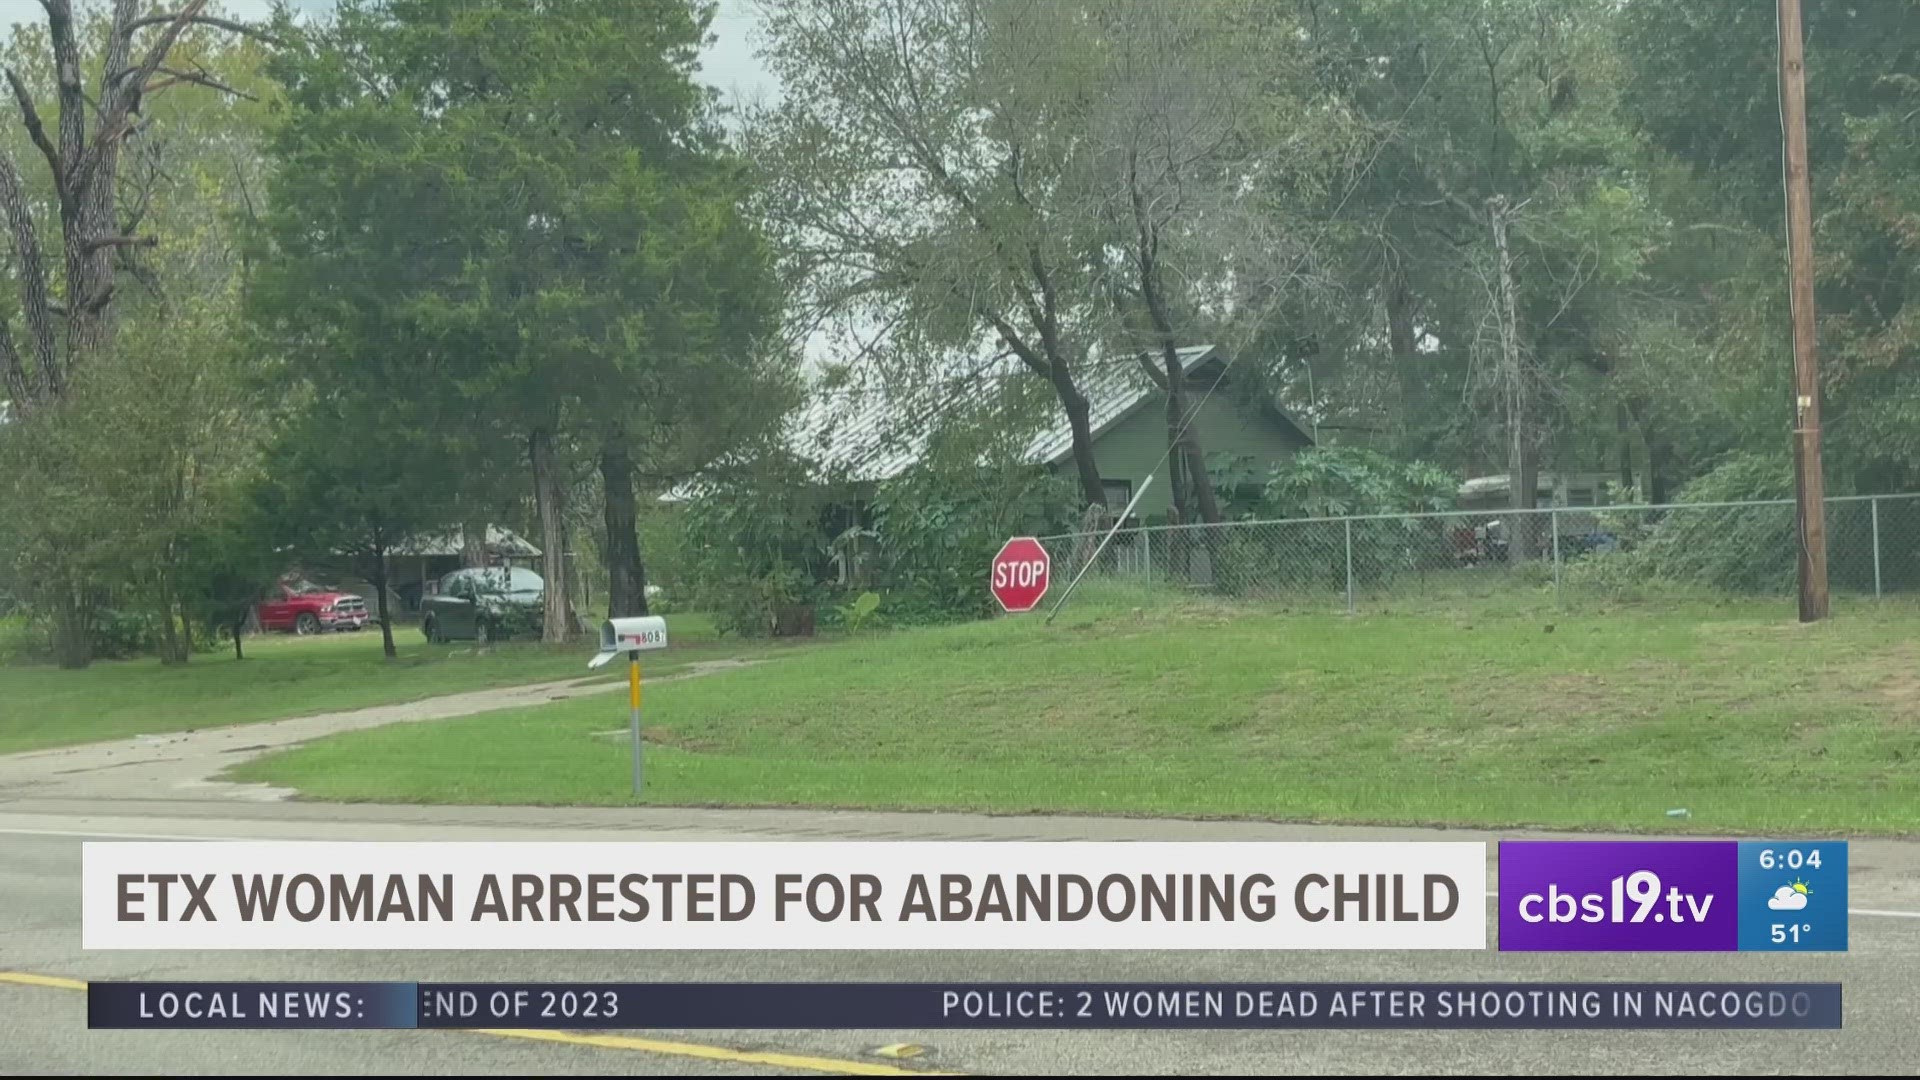 Officials said the 8-month-old baby is safe and was placed with a family member by CPS.